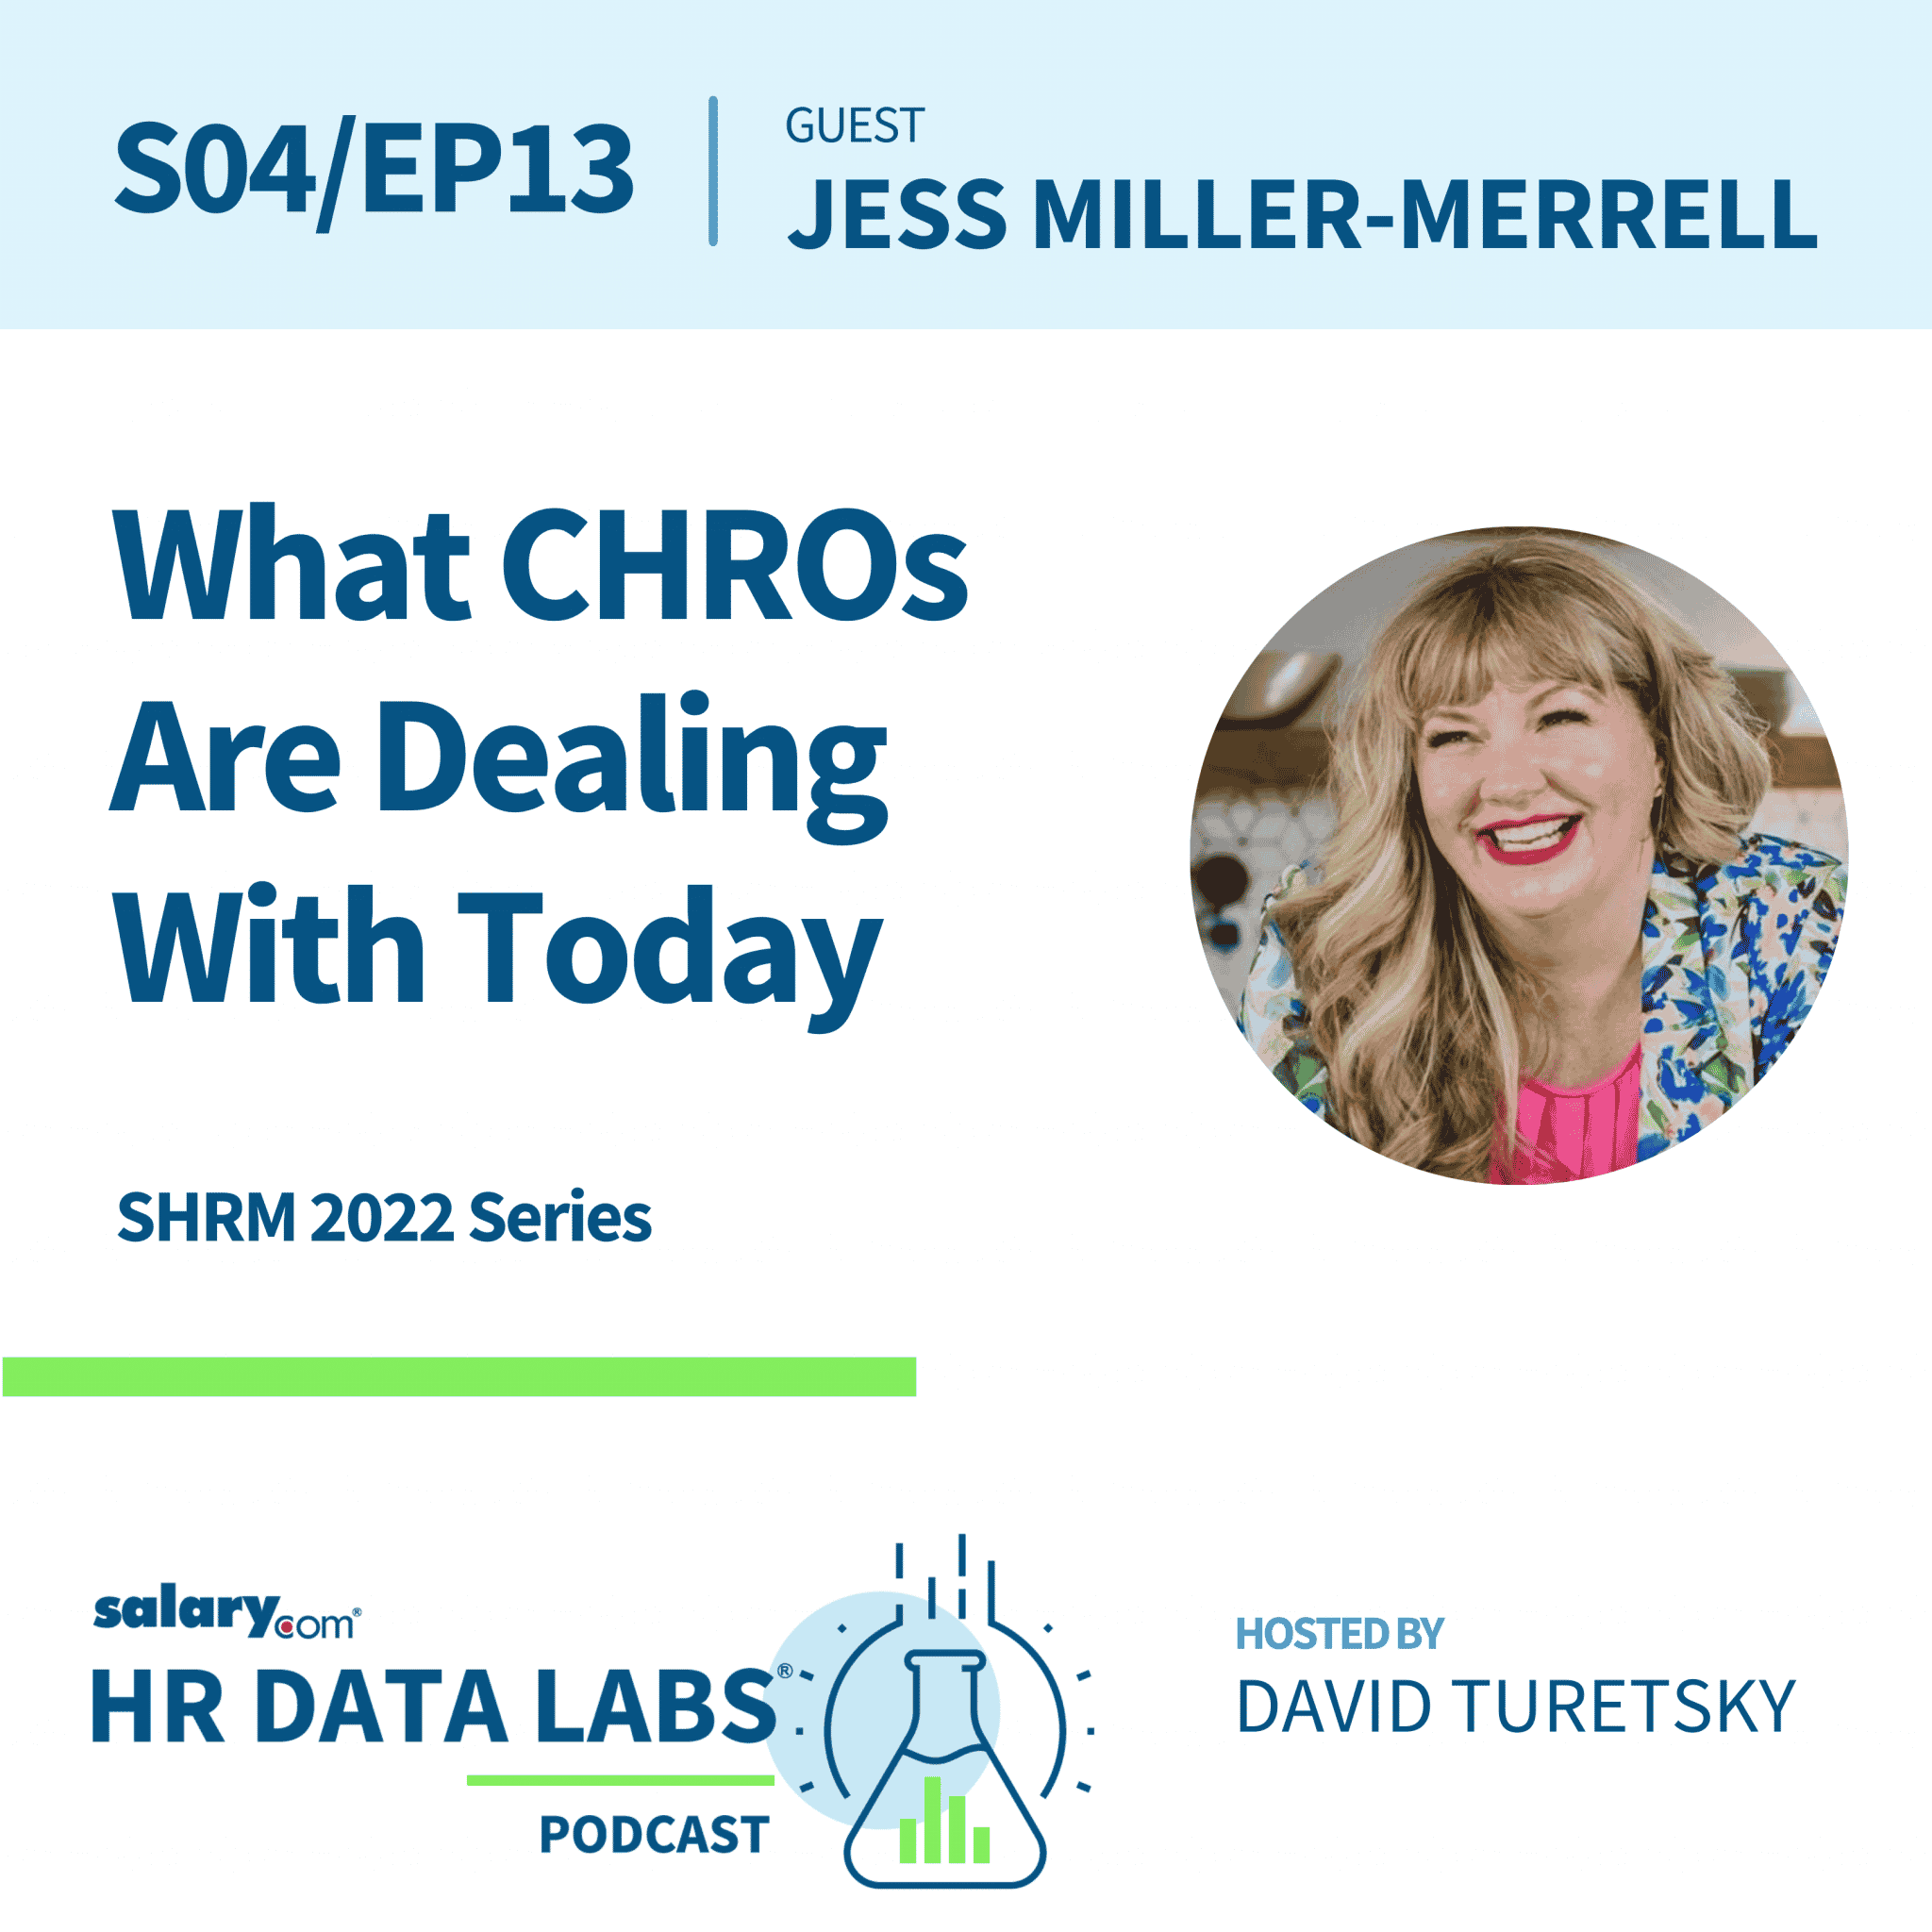 Jessica Miller-Merrell – SHRM 2022 Series: What CHROs Are Dealing With Today